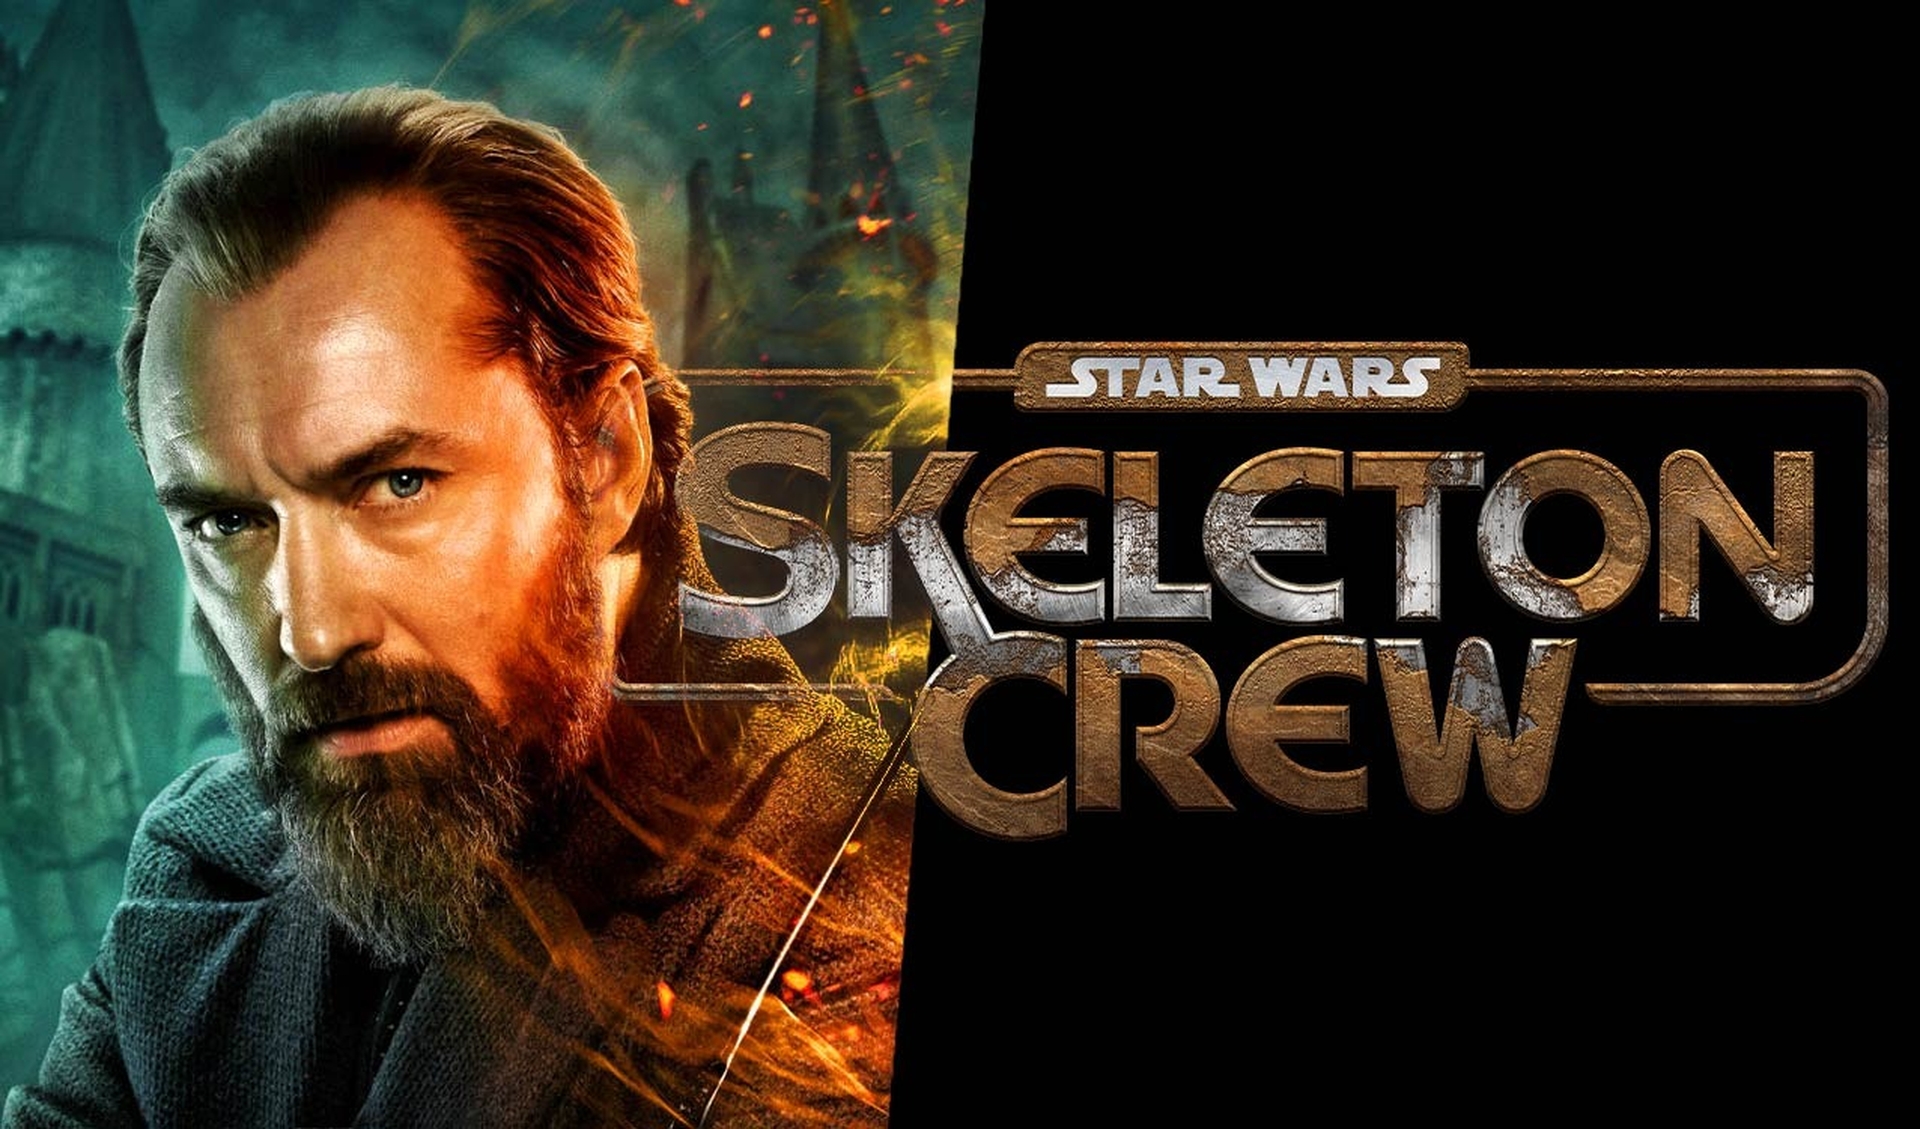 Skeleton Crew Star Wars, a new Disney+ series starring Jude Law, has been unveiled, and we covered all we know on the upcoming series and other Disney projects.